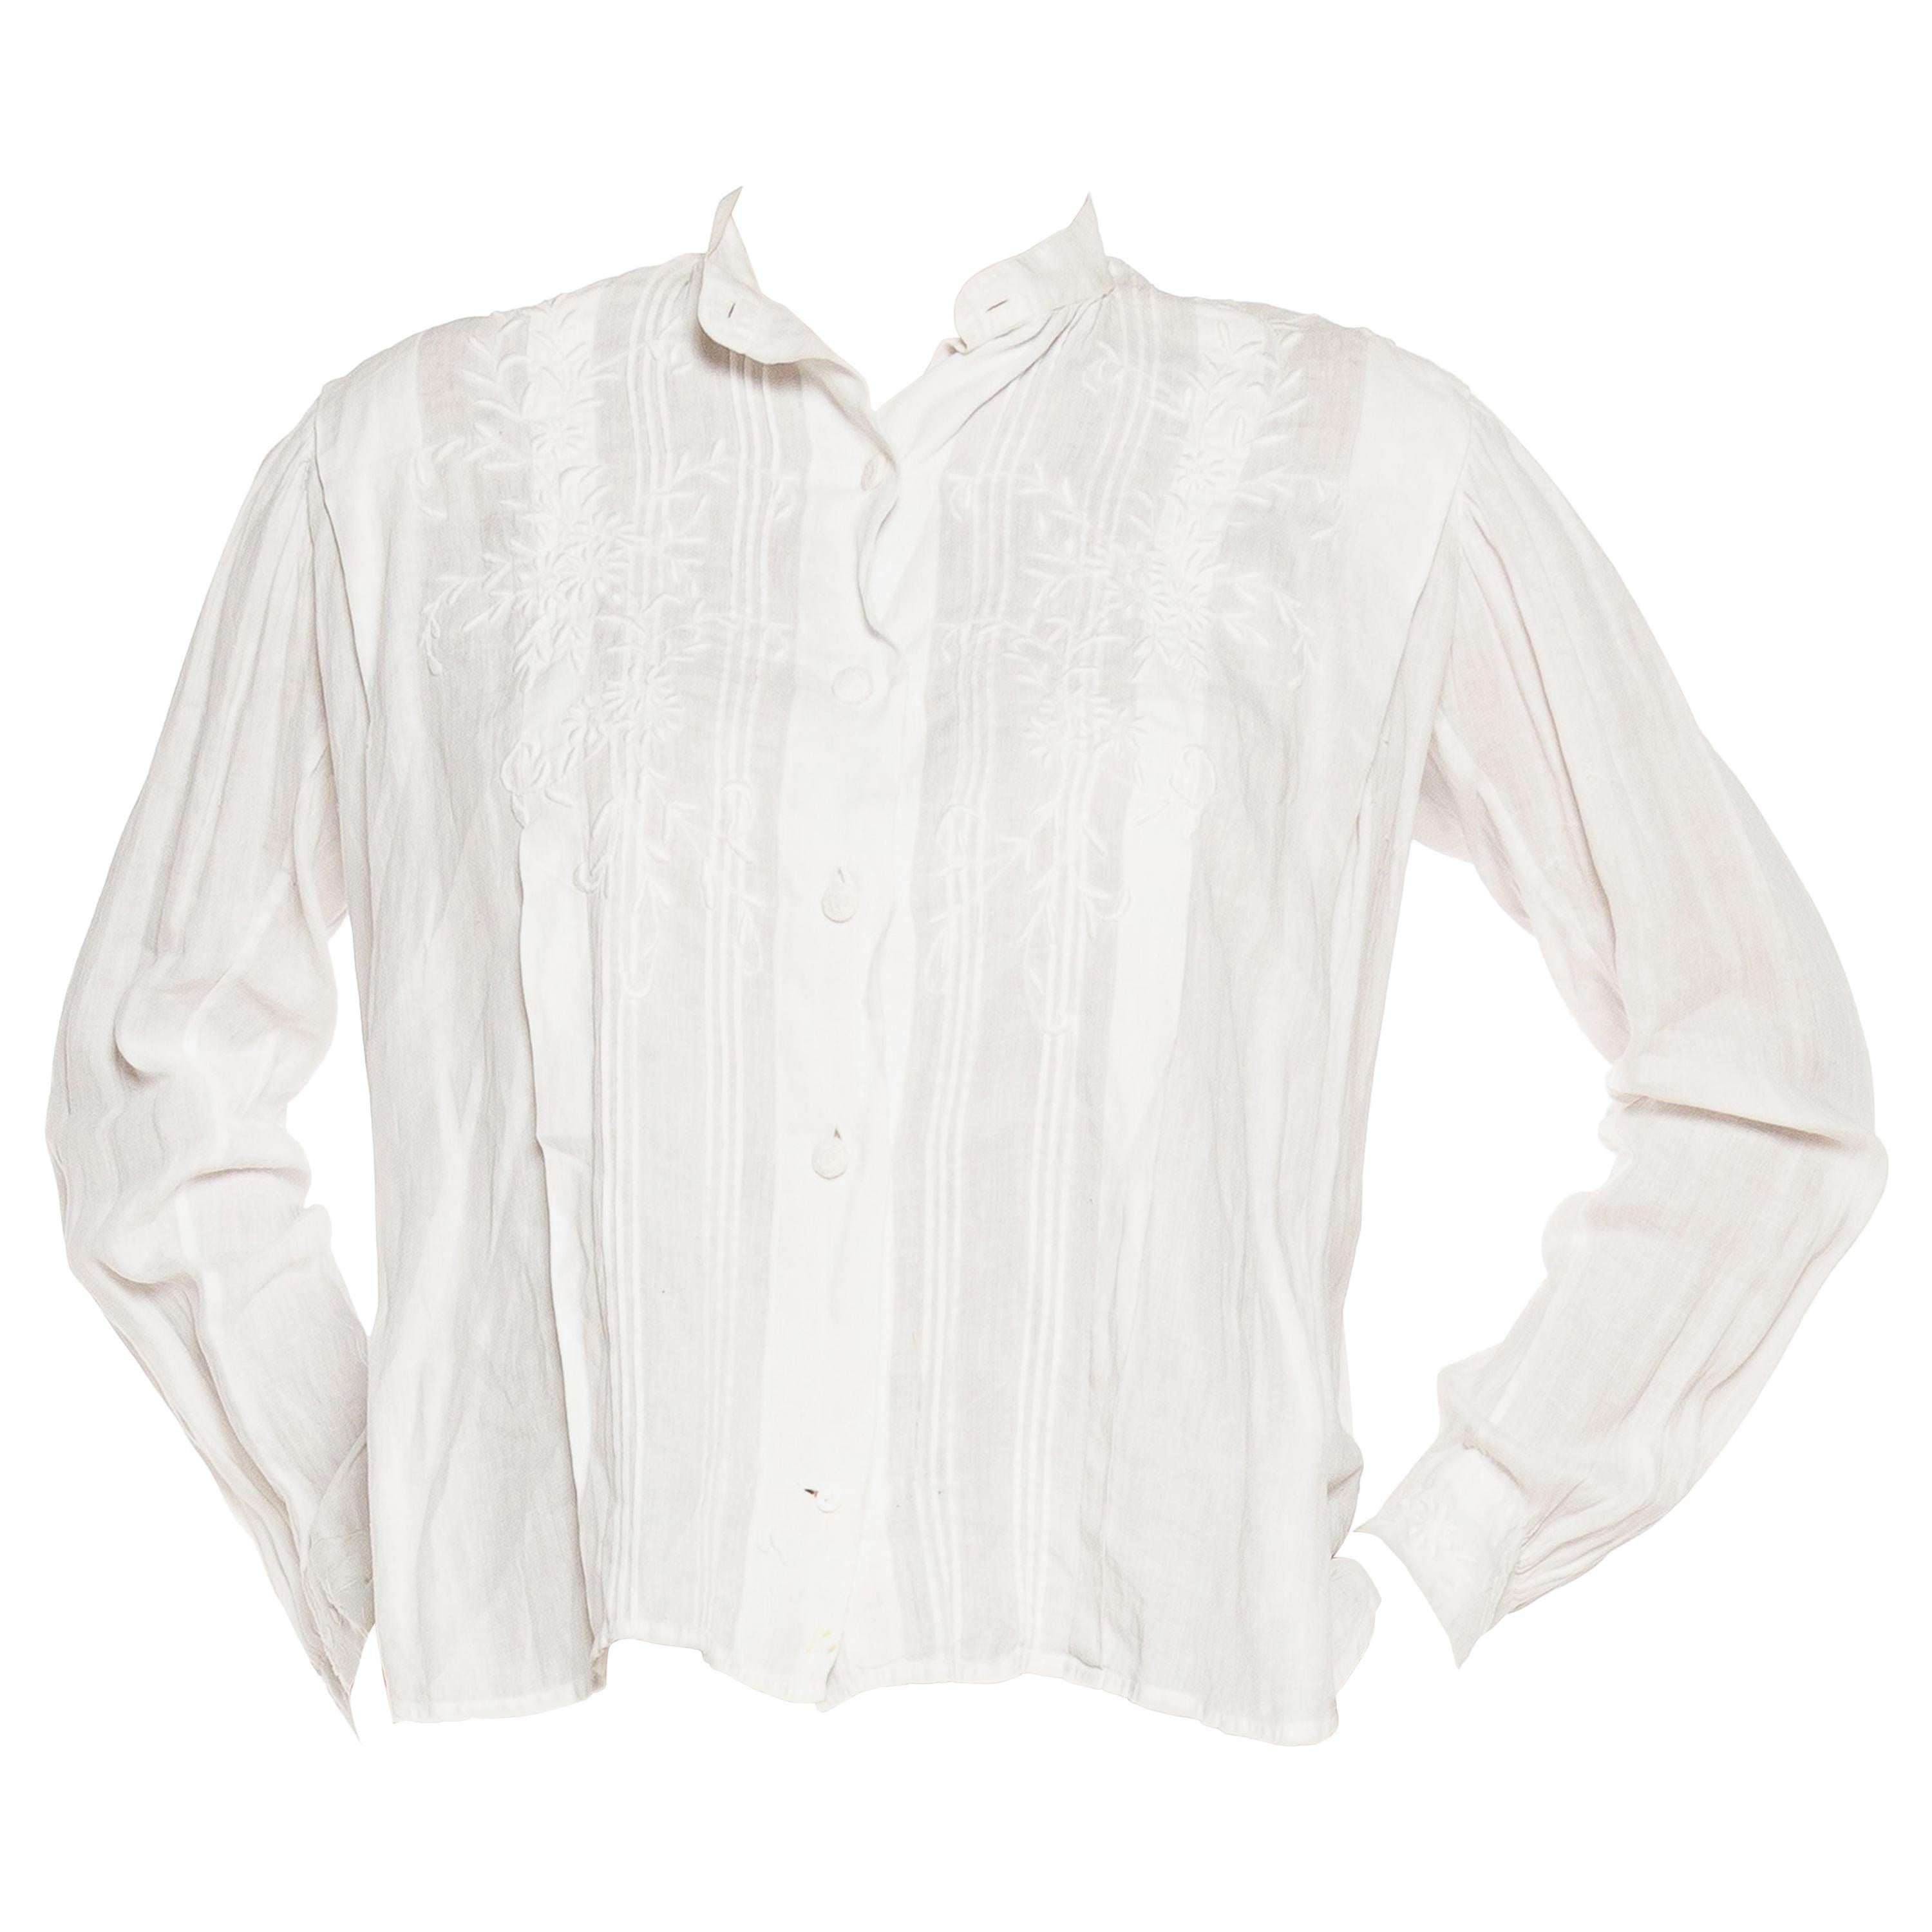 Edwardian White Linen Pin-Tucked & Hand-Embroidered "Mens" Style Blouse Can Tak